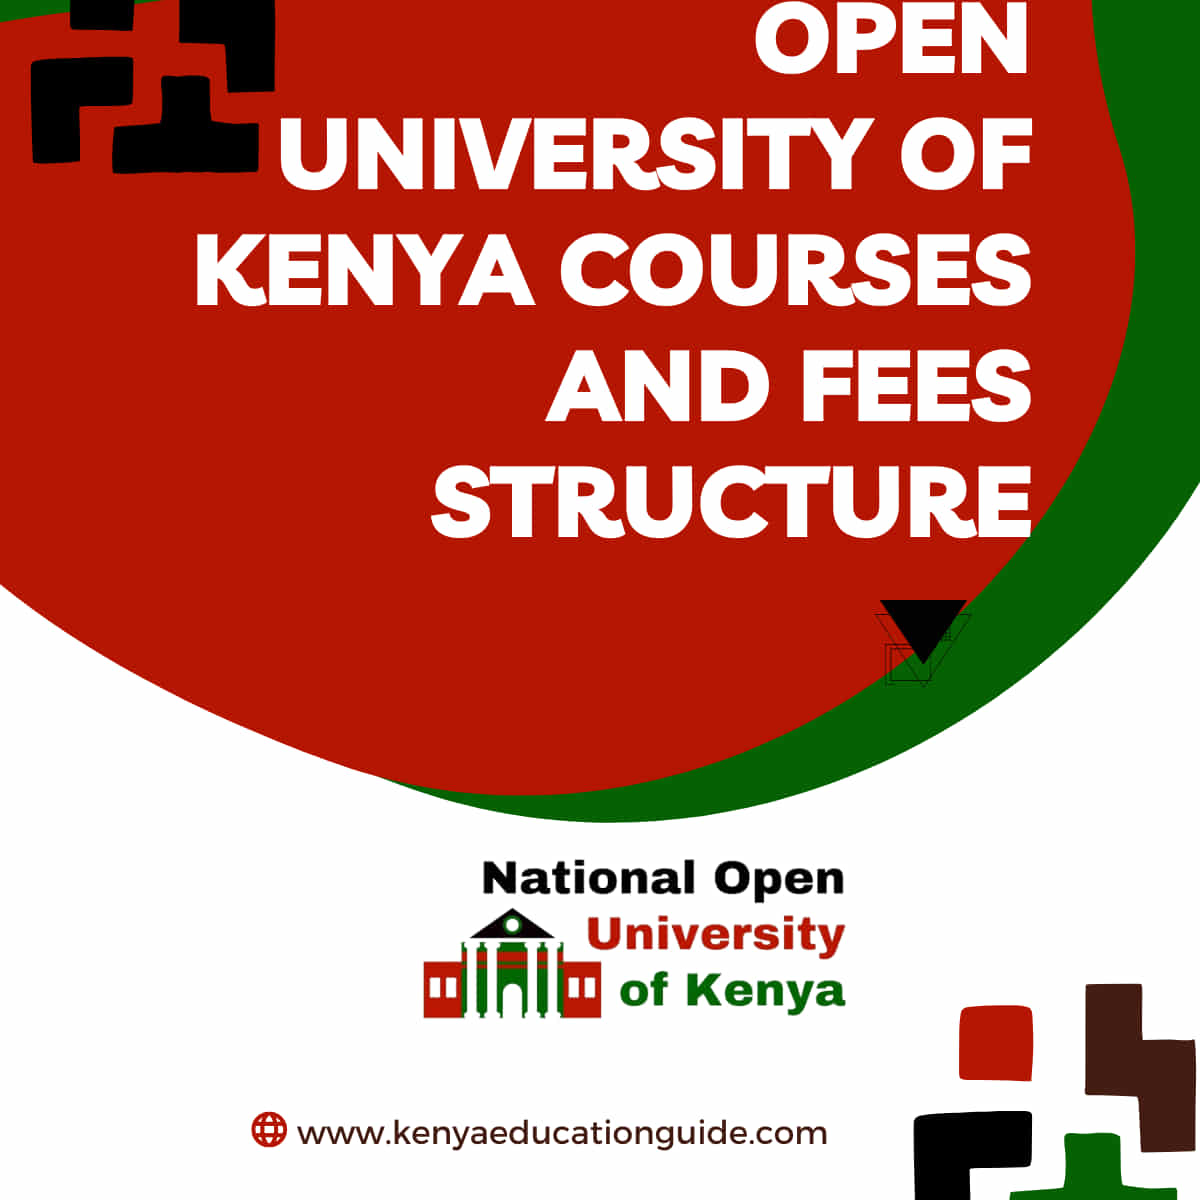 Open university of Kenya courses and fee structure